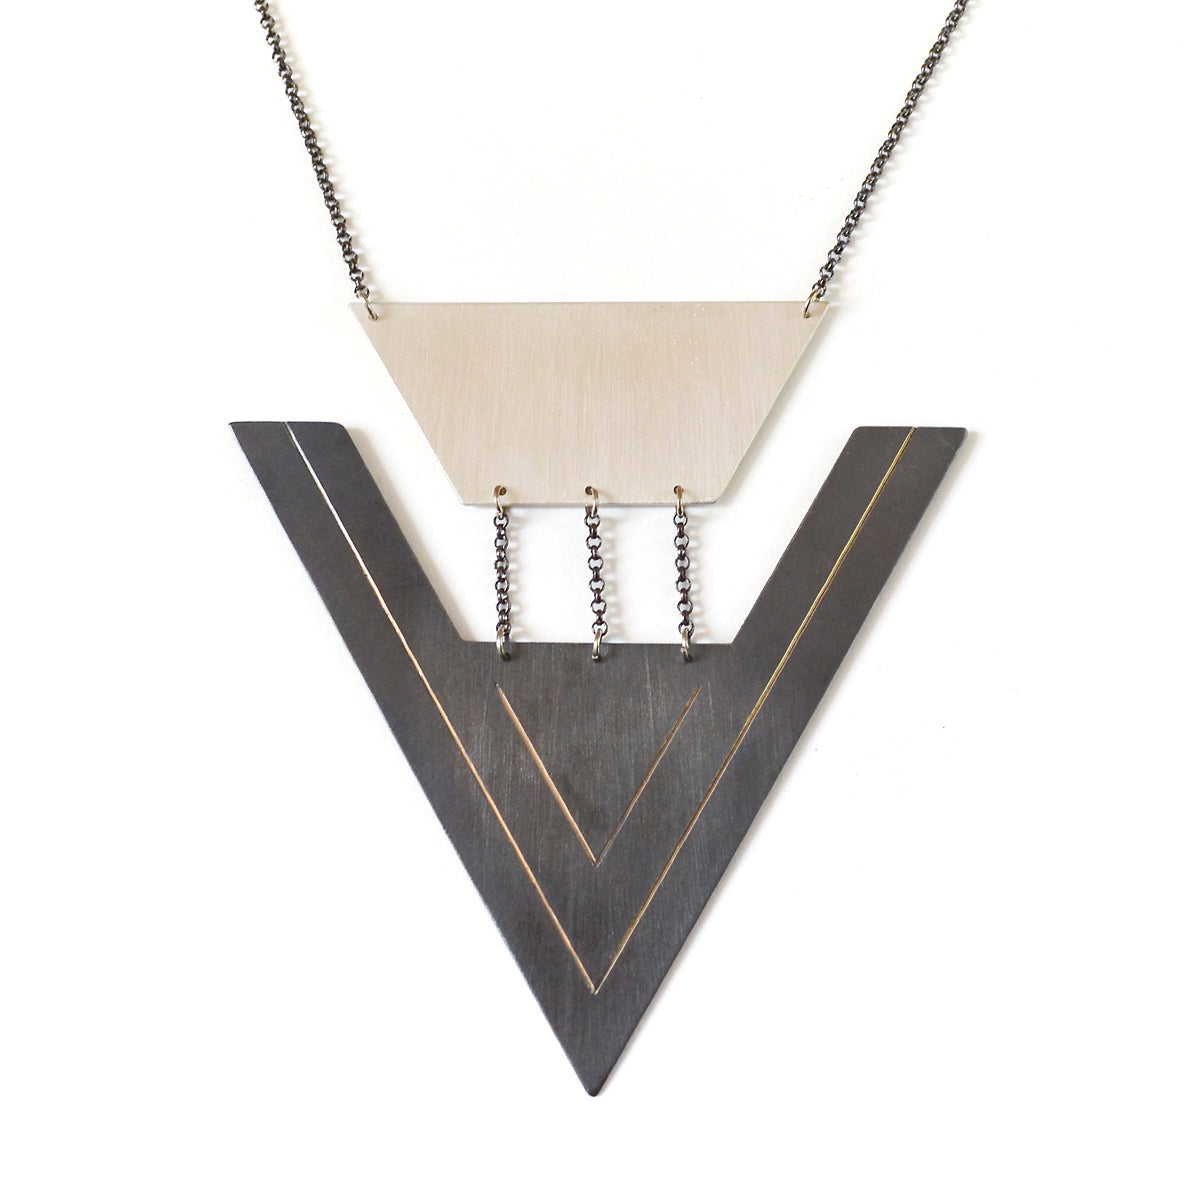 Traces - Inverted Arrowheads Necklace - Silver & Gun Metal